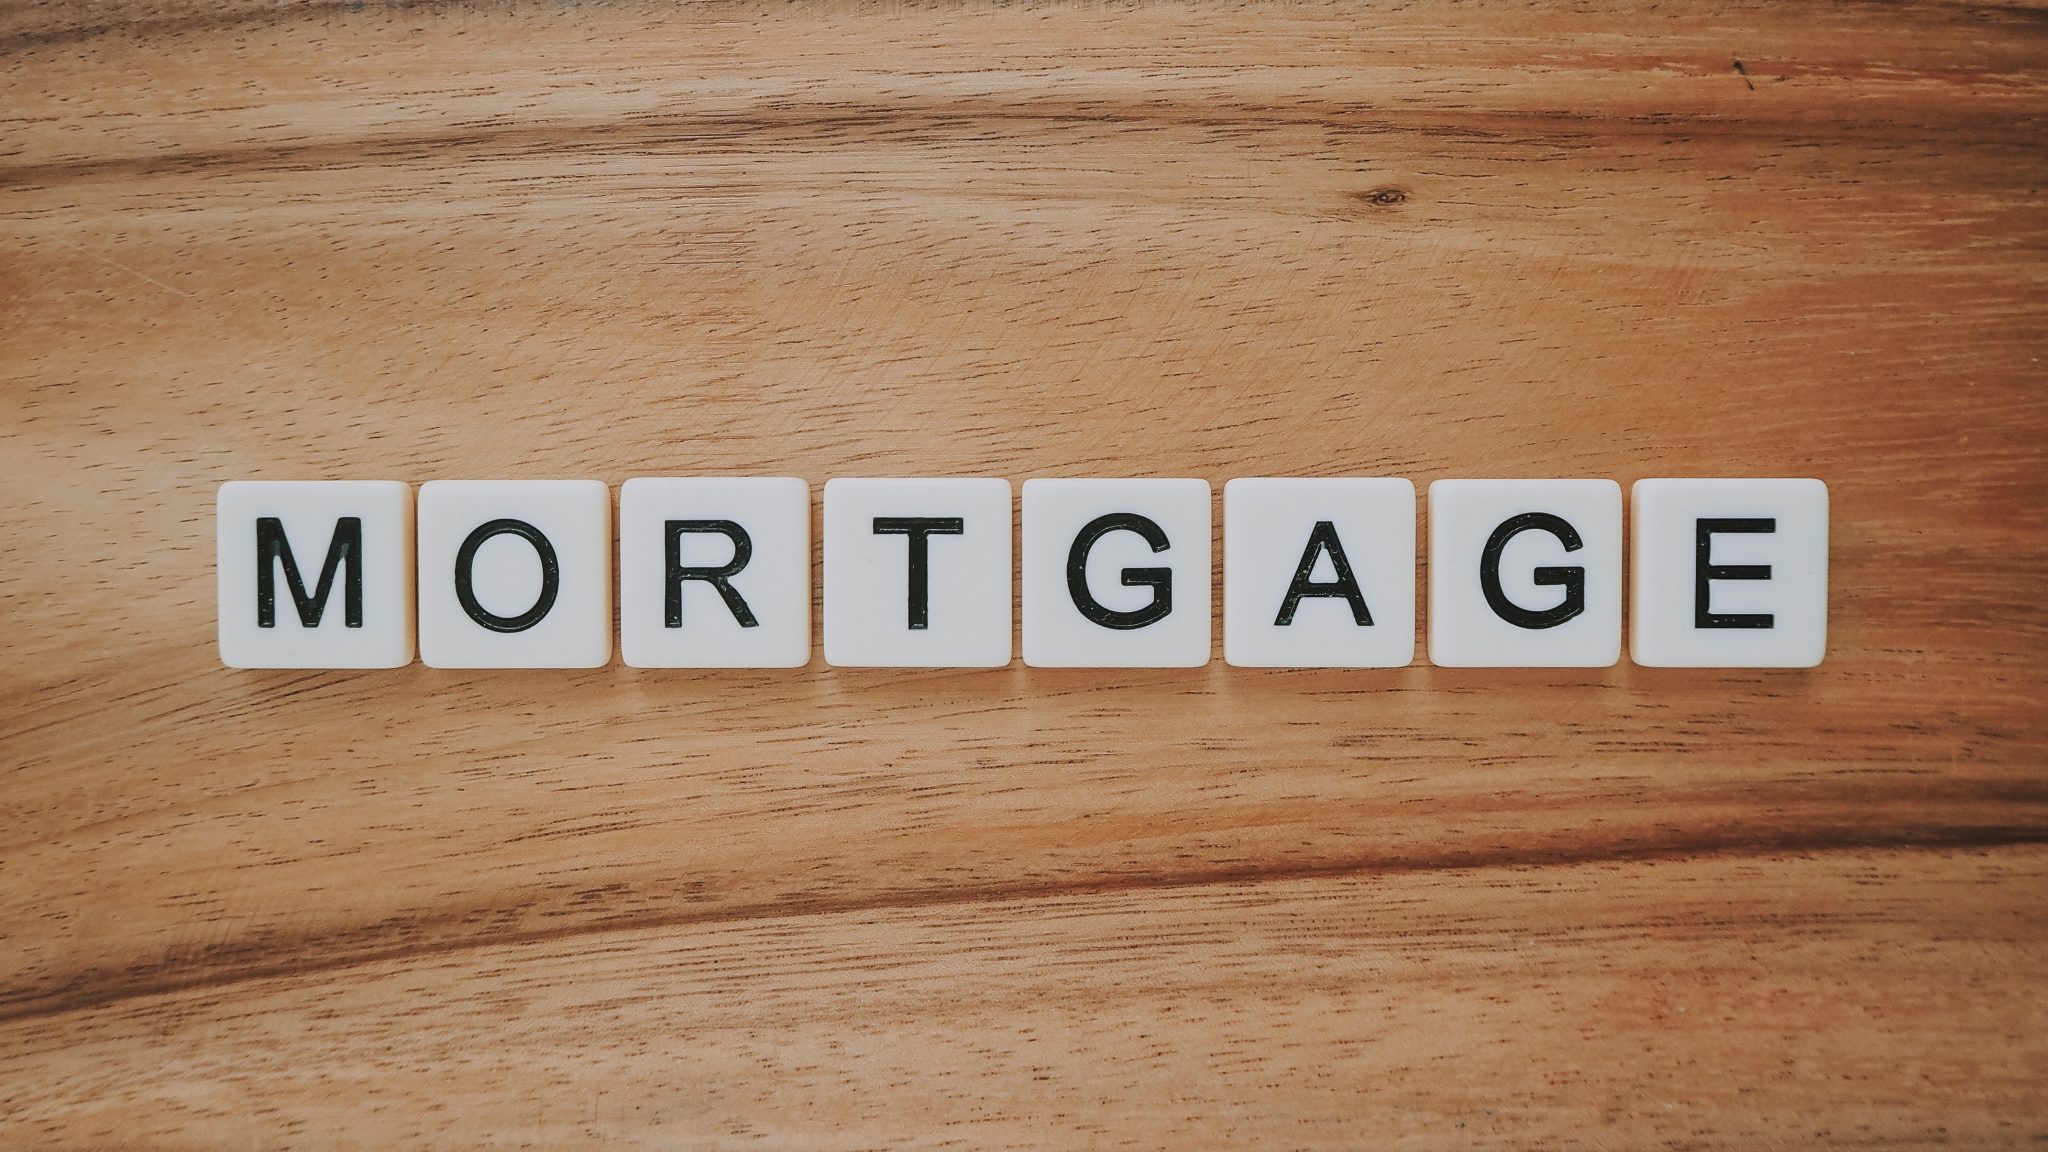 40-year-mortgage-loans-given-to-only-those-30-and-below-portugal